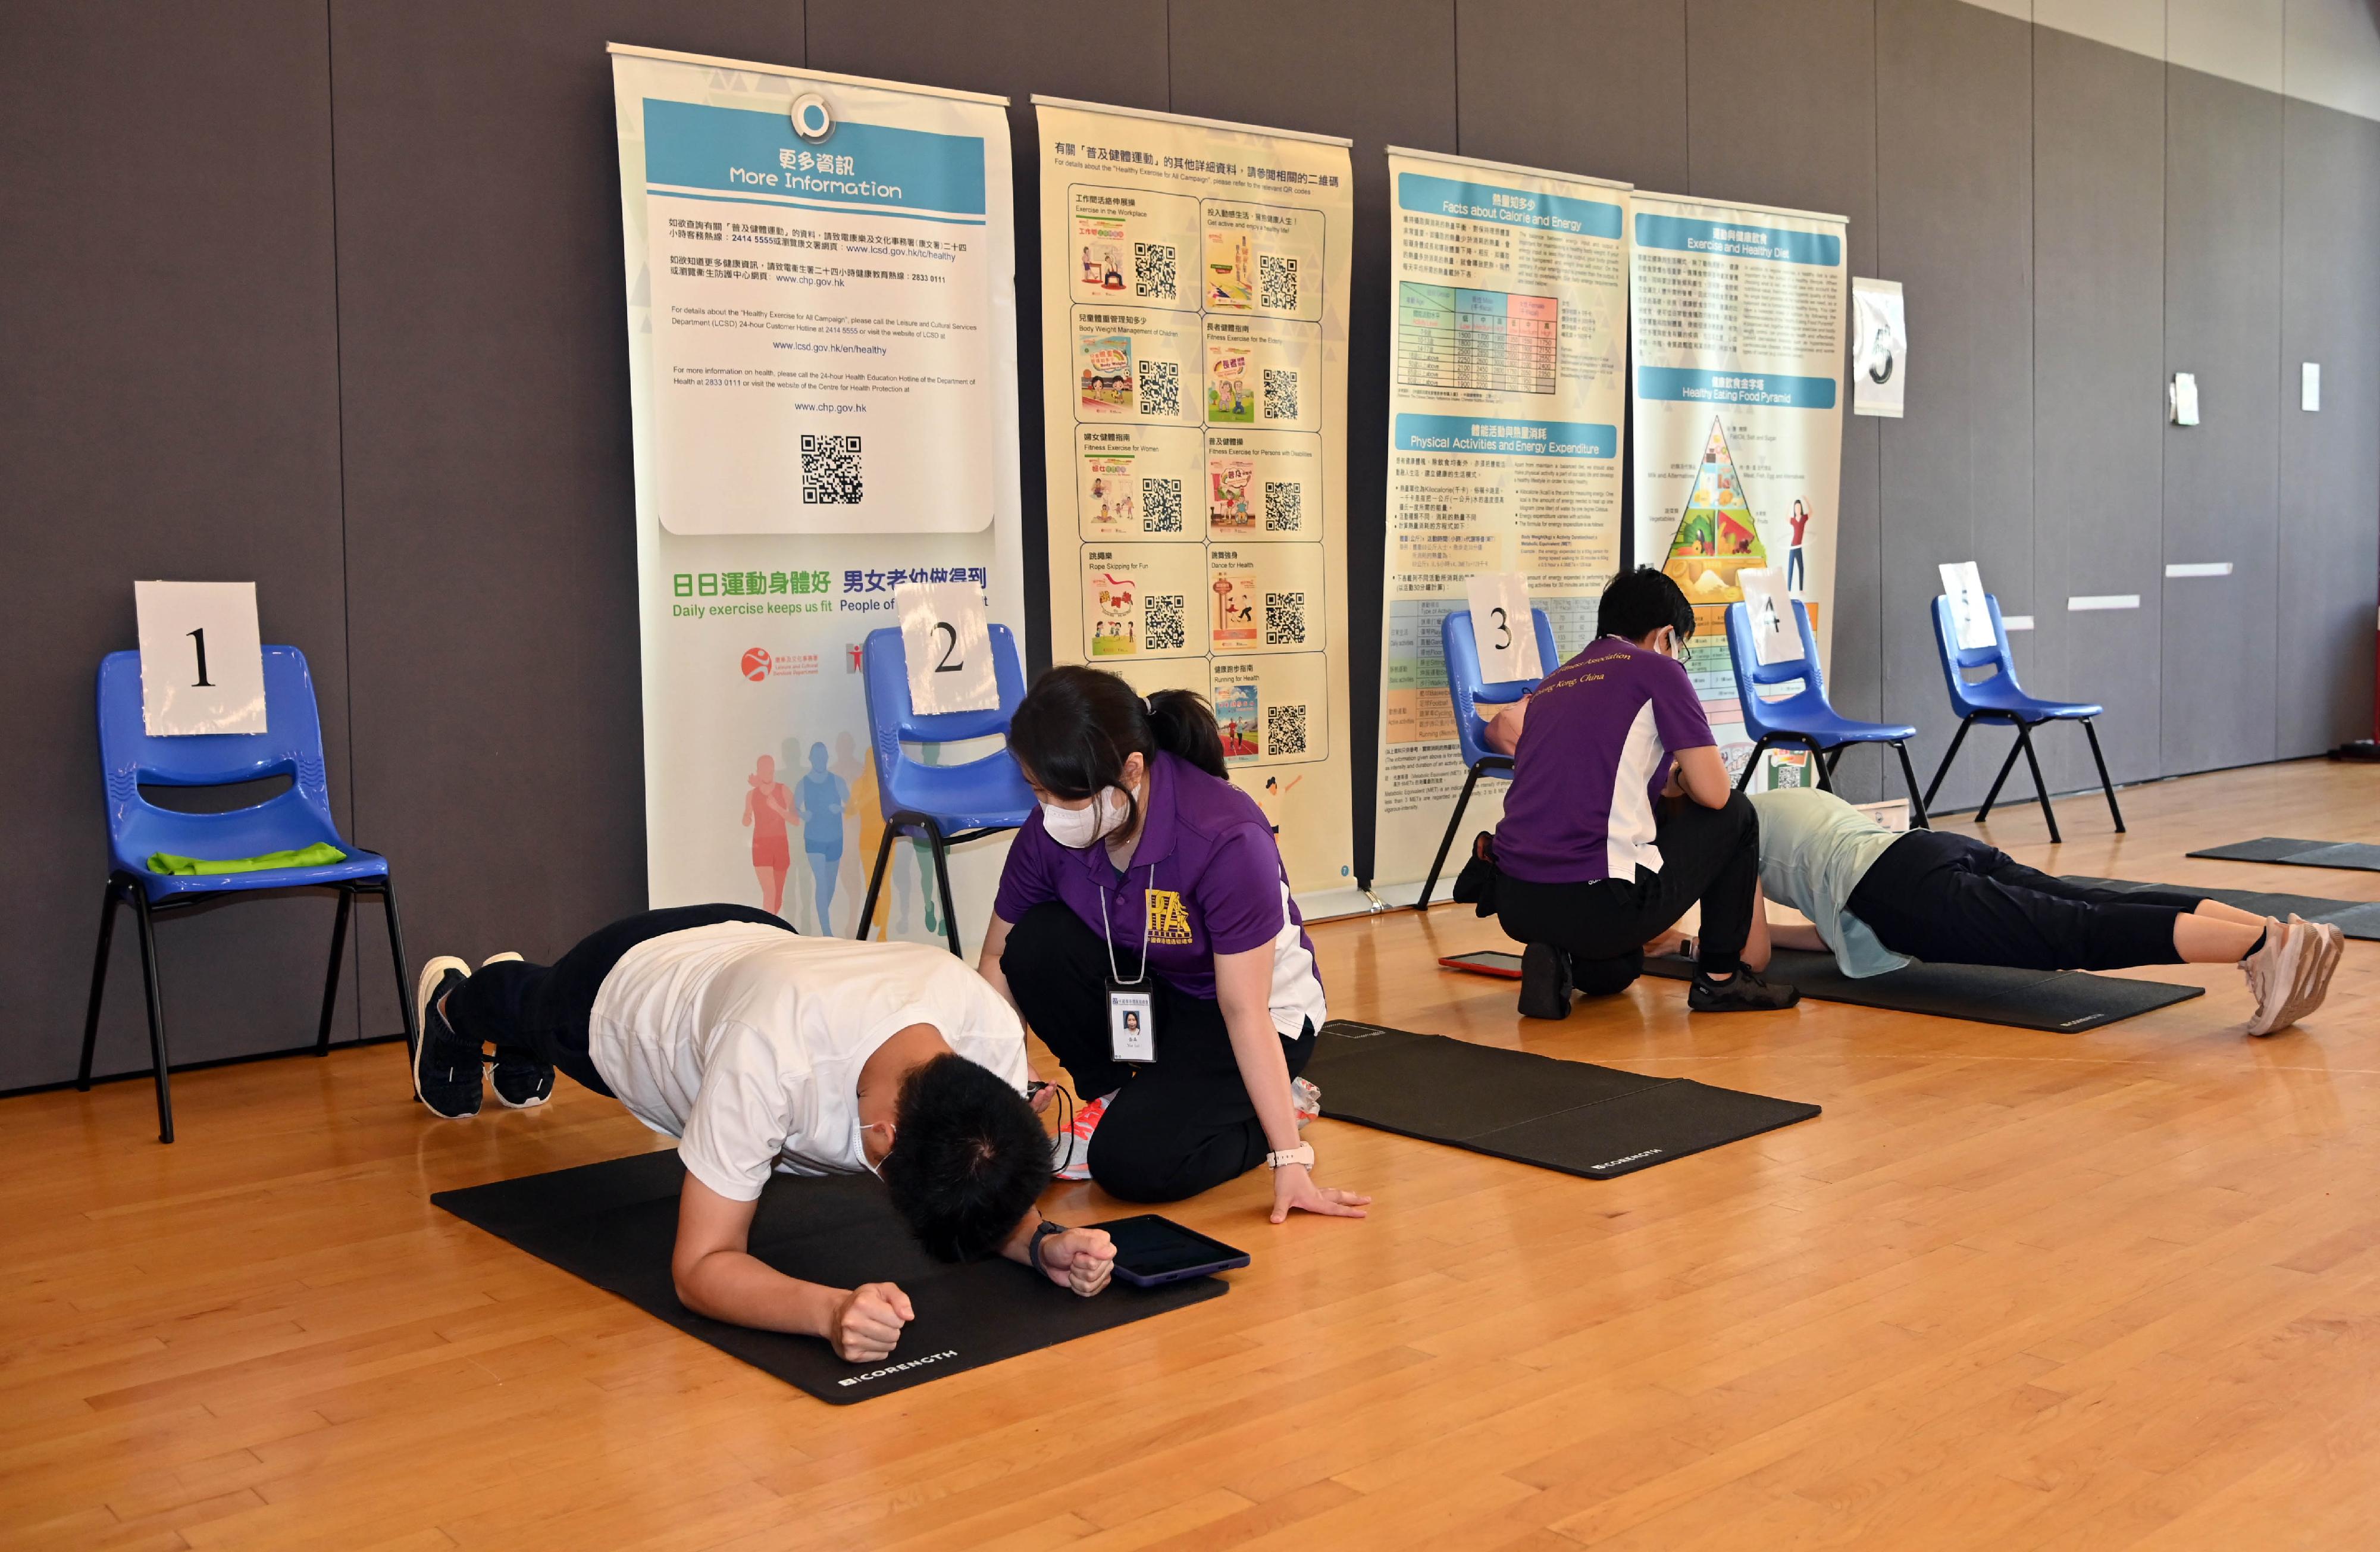 The Leisure and Cultural Services Department will hold a new round of Territory-wide Physical Fitness Survey for the Community test days in September which will be open for enrollment from today (August 31). Members of the public are welcome to join the activities for free. Photo shows participants doing a plank test.